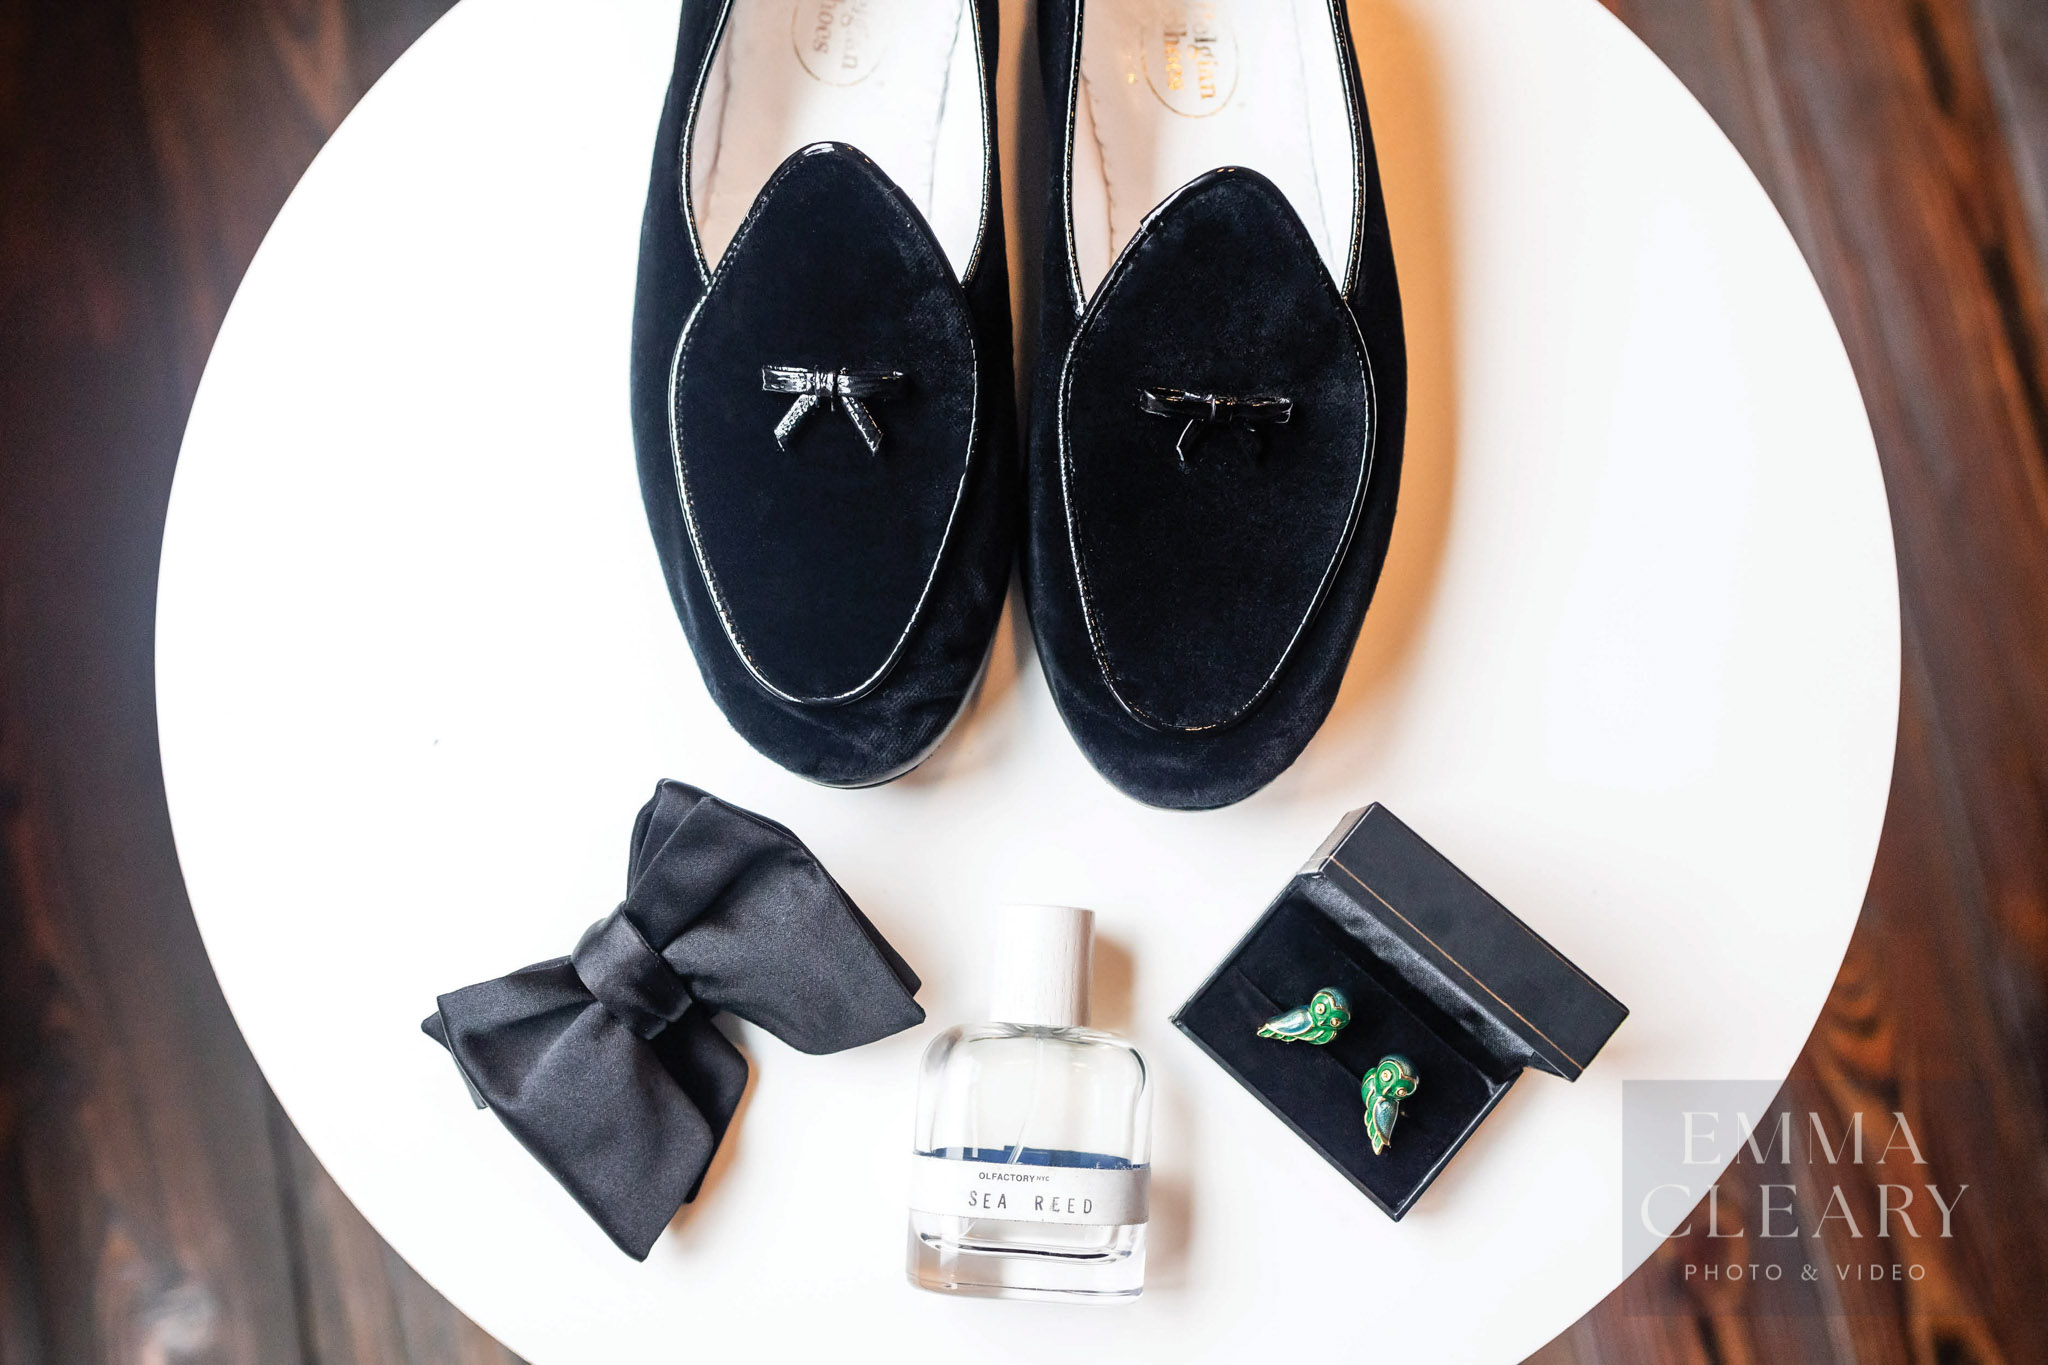 Groom's shoes, bow tie and other details